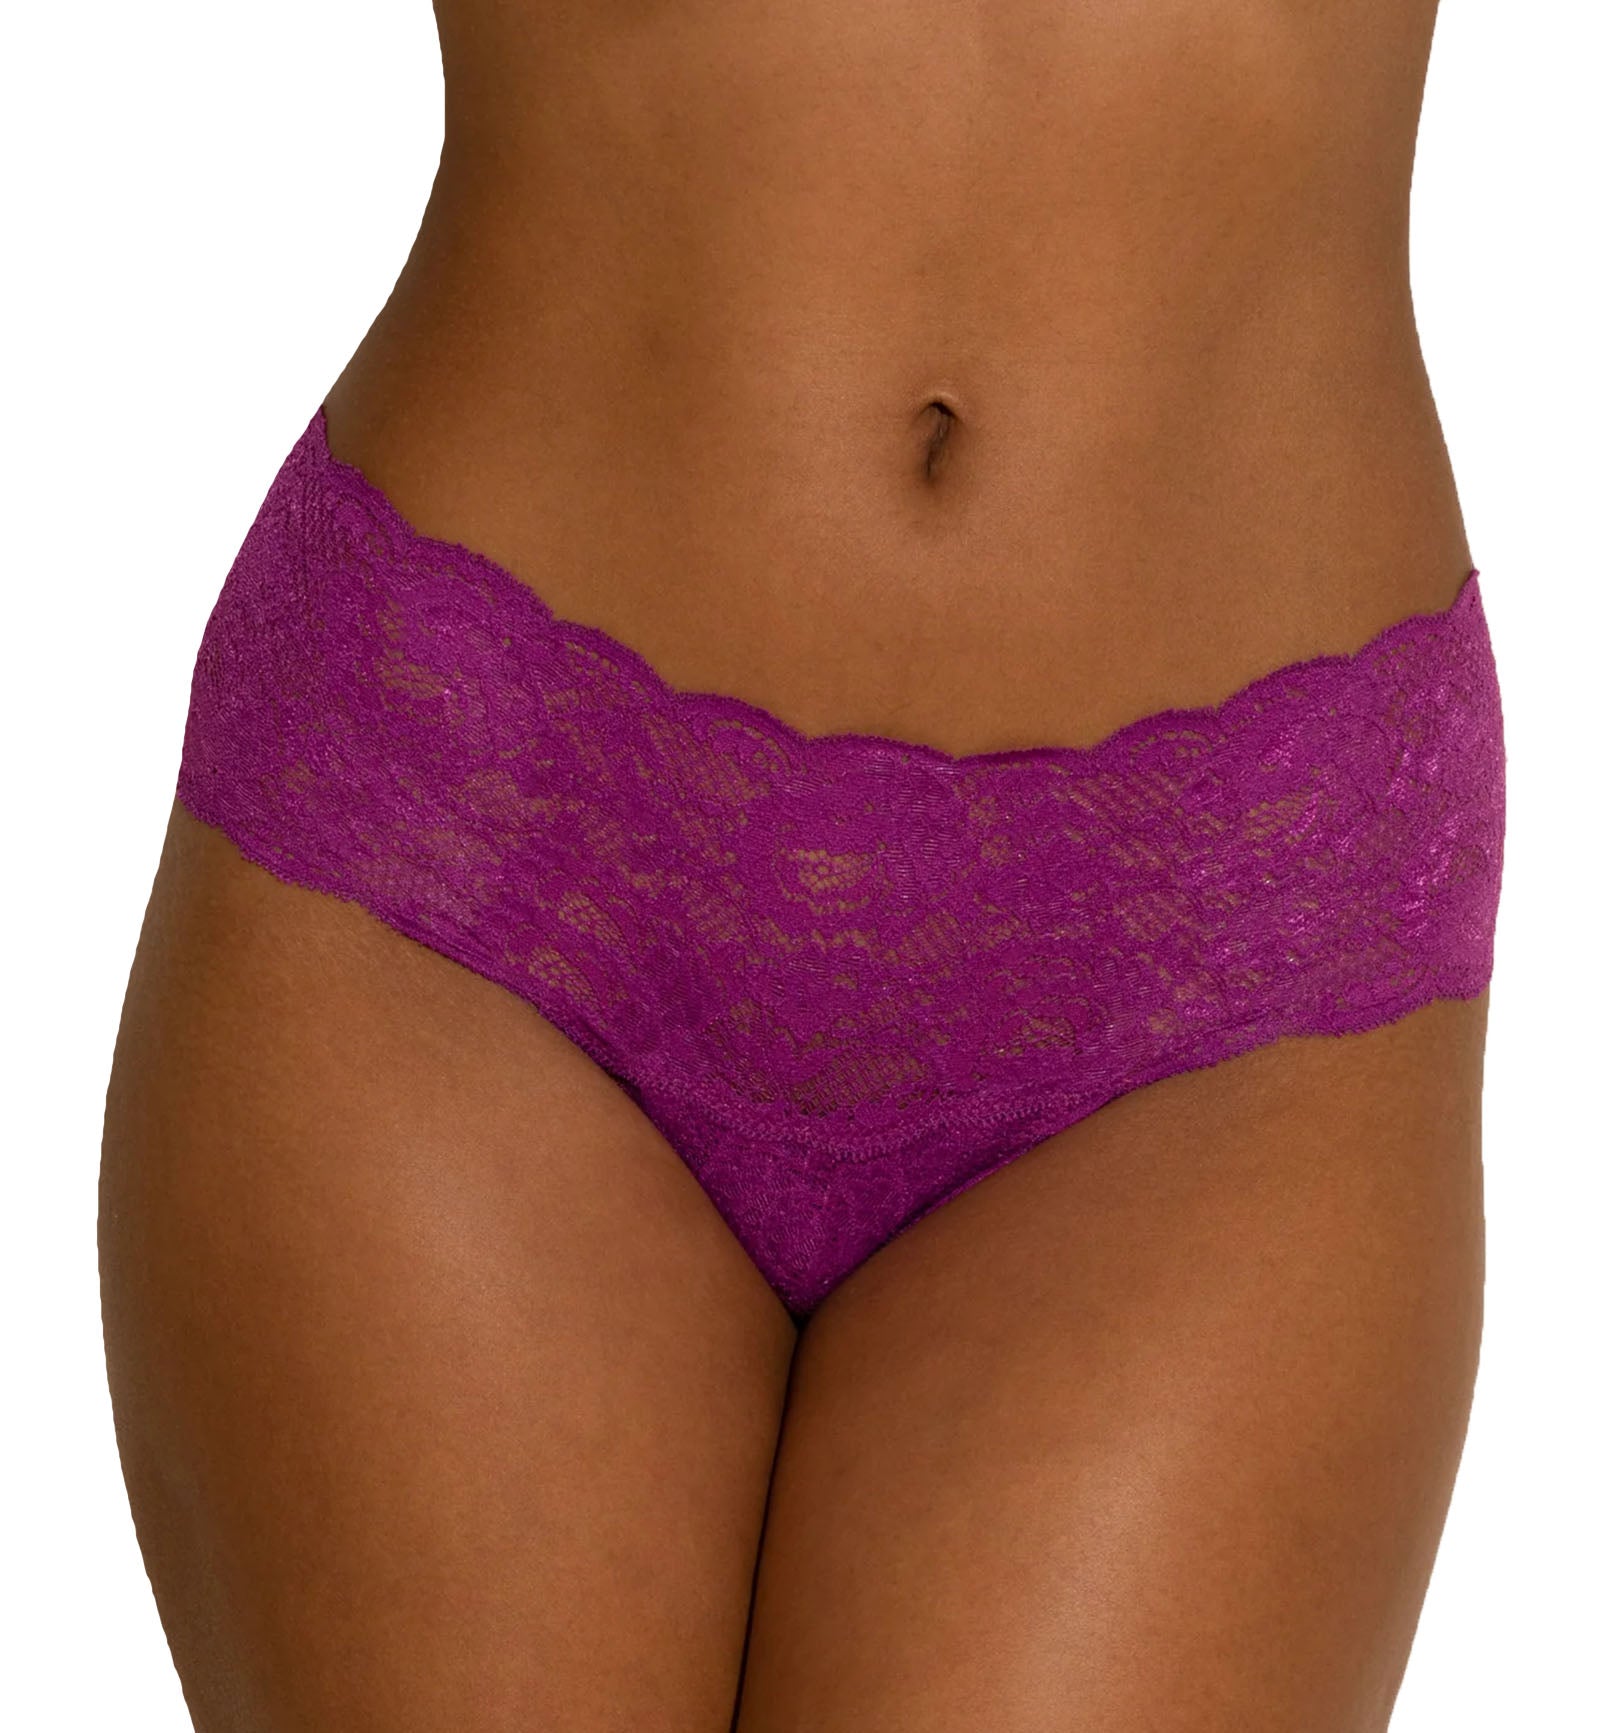 Cosabella Never Say Never Hottie Lowrider Hotpant (NEVER07ZL),S/M,Swiss Beet - Swiss Beet,S/M